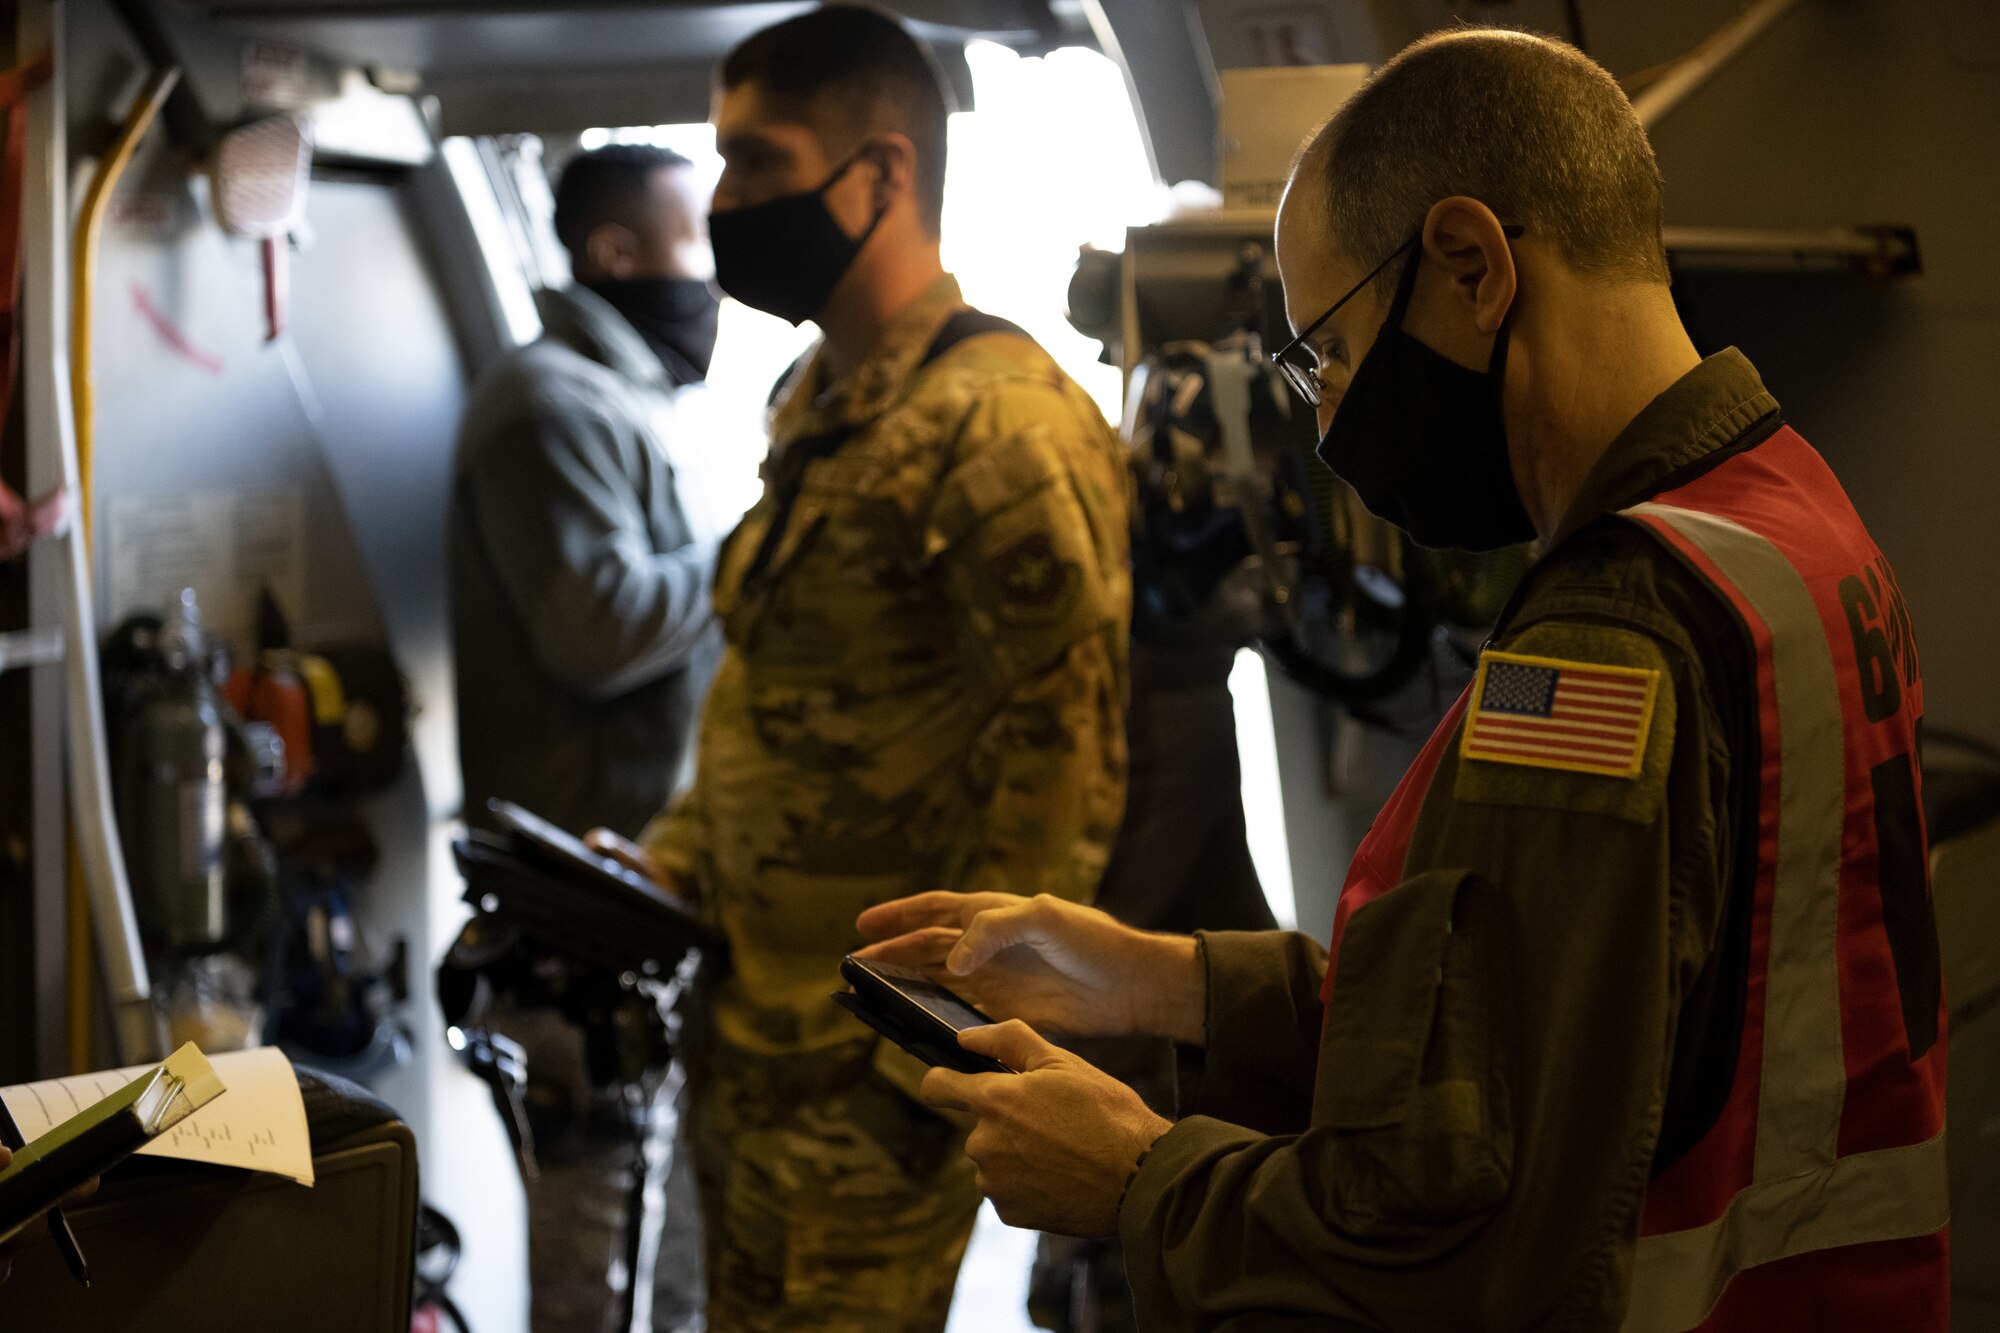 U.S. Air Force Lt. Col. Michael McCartney, 6th Air Refueling Squadron KC-10 Extender instructor pilot, reads operating instructions for Aircrew Eye and Respiratory System gear Nov. 16, 2020, at Travis Air Force Base, California. McCartney was one of three 60th Air Mobility Wing Inspection Team members on a simulated aerial refueling flight who evaluated the aircrew’s performance during a basewide exercise. (U.S. Air Force photo by Airman 1st Class Alexander Merchak)